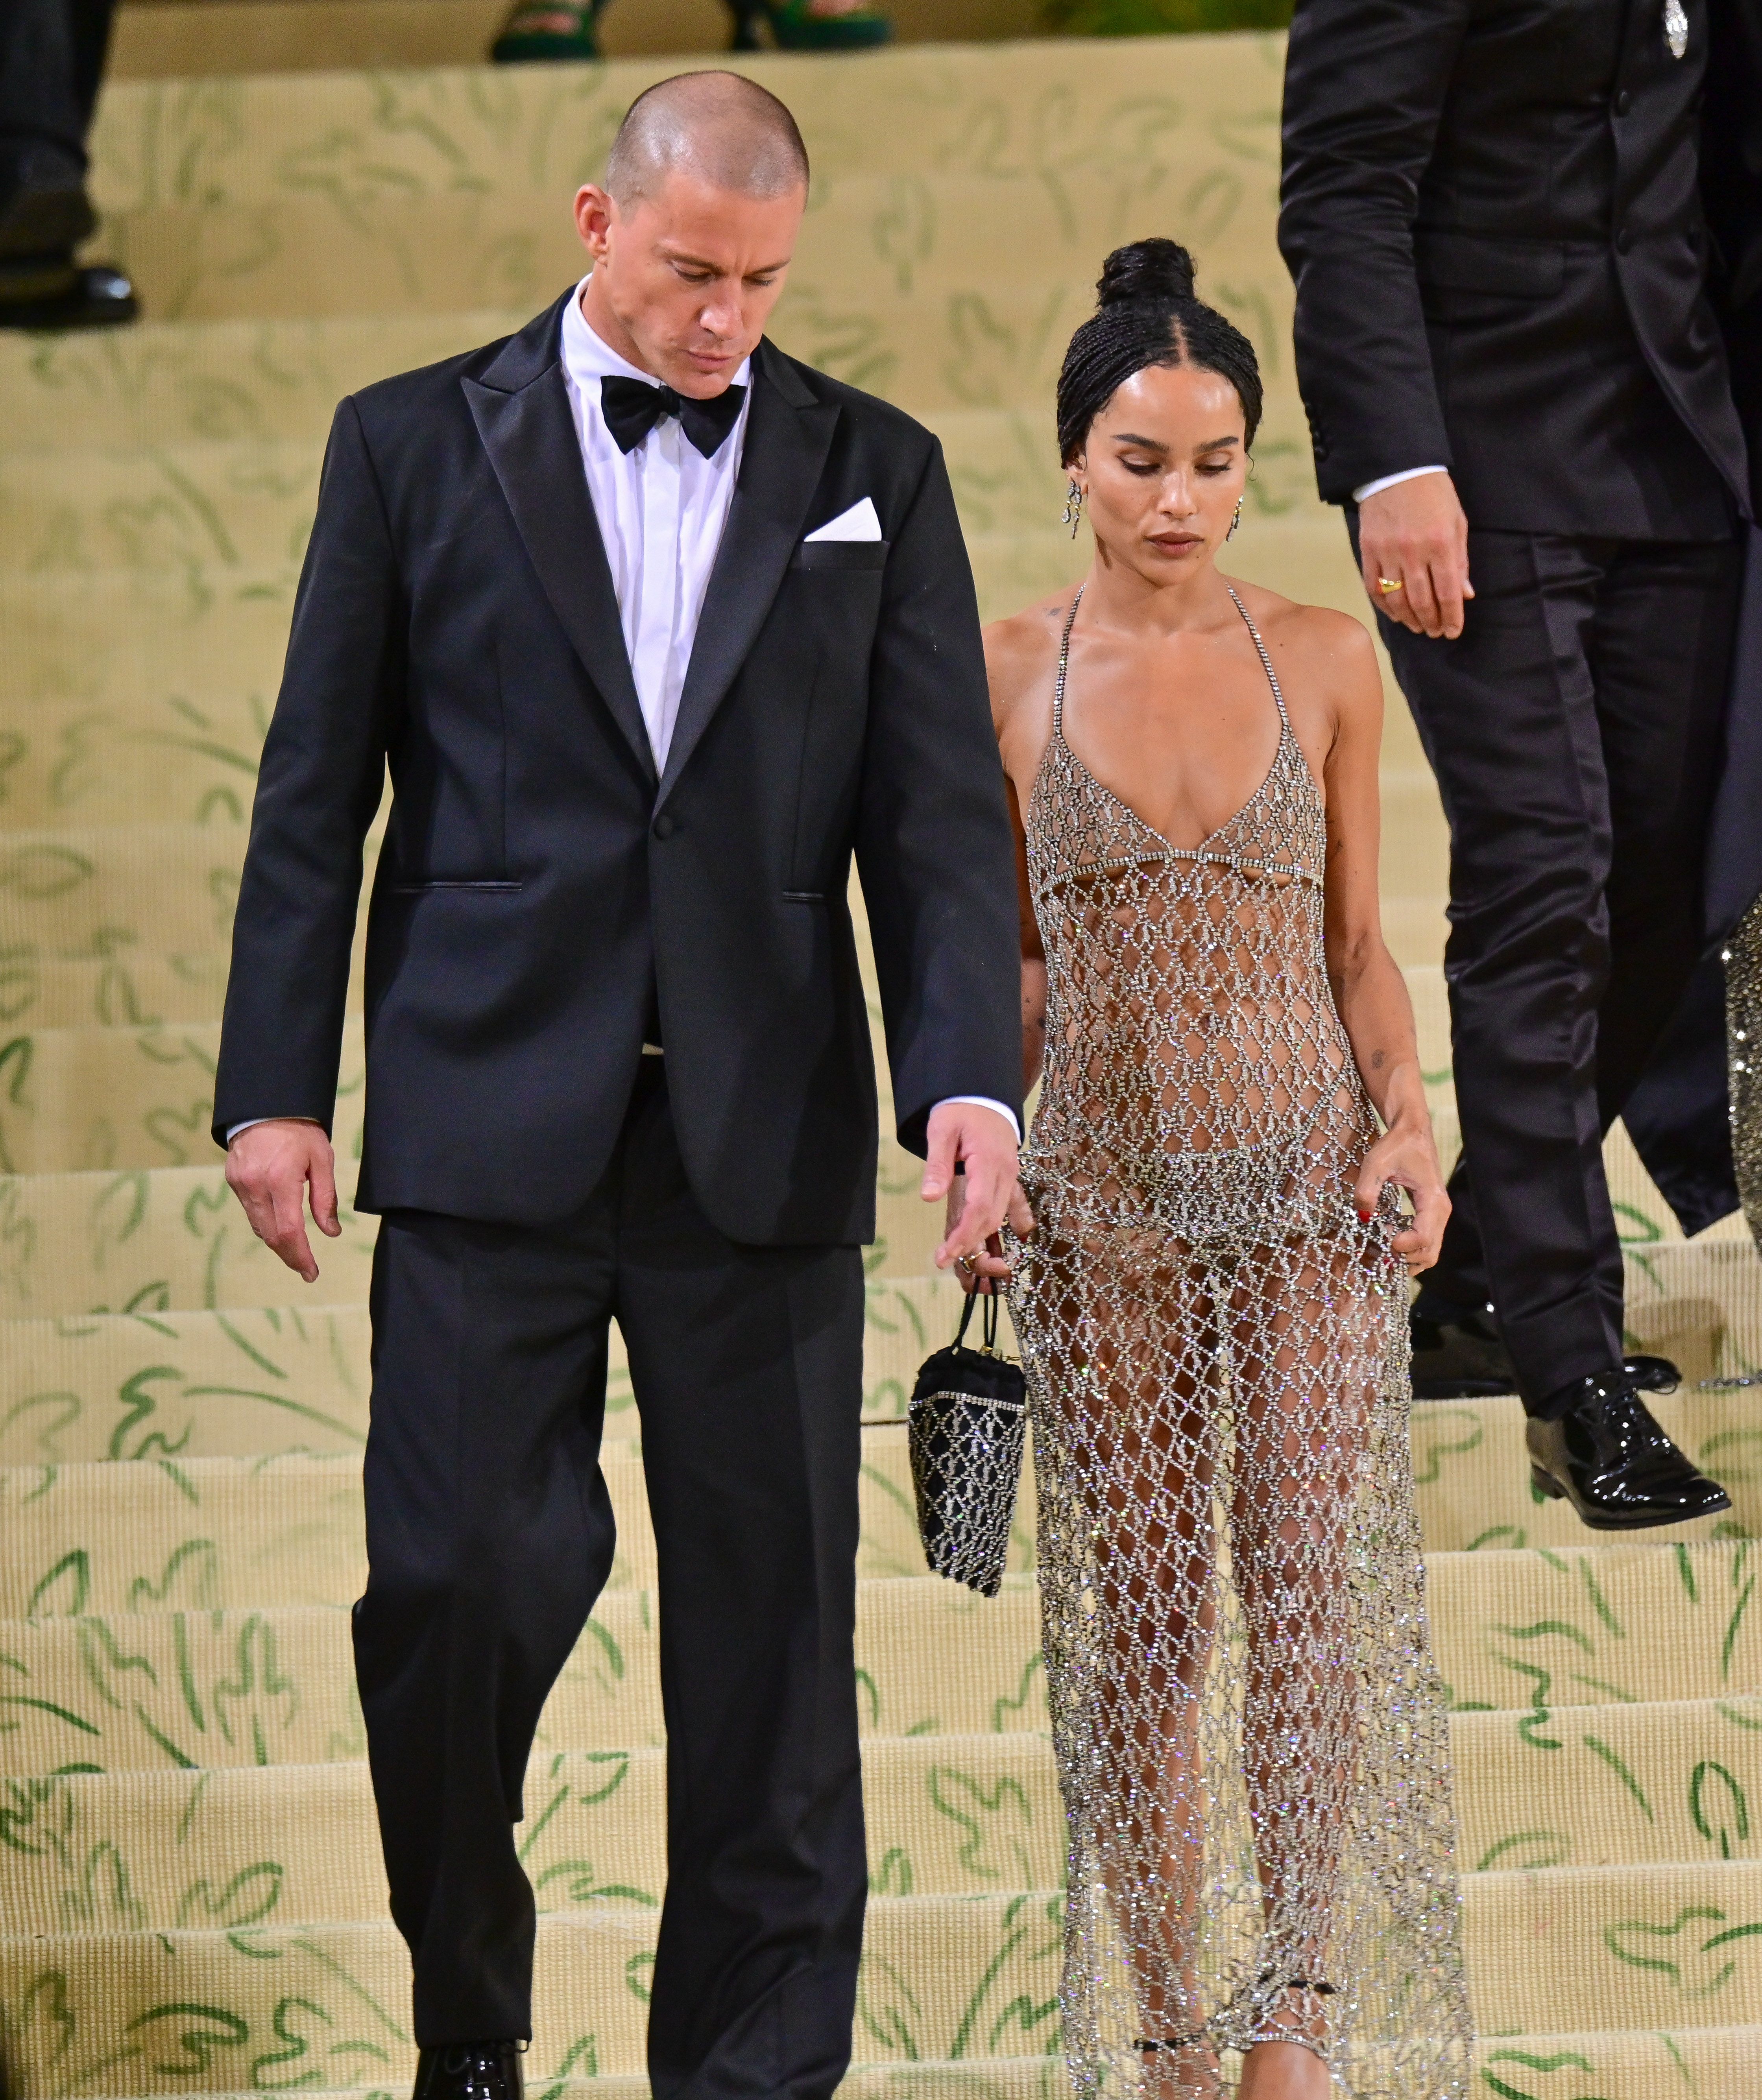 Channing Tatum and Zoe Kravitz during the 2021 Met Gala benefit "In America: A Lexicon of Fashion" at Metropolitan Museum of Art on September 13, 2021, in New York City. | Source: Getty Images